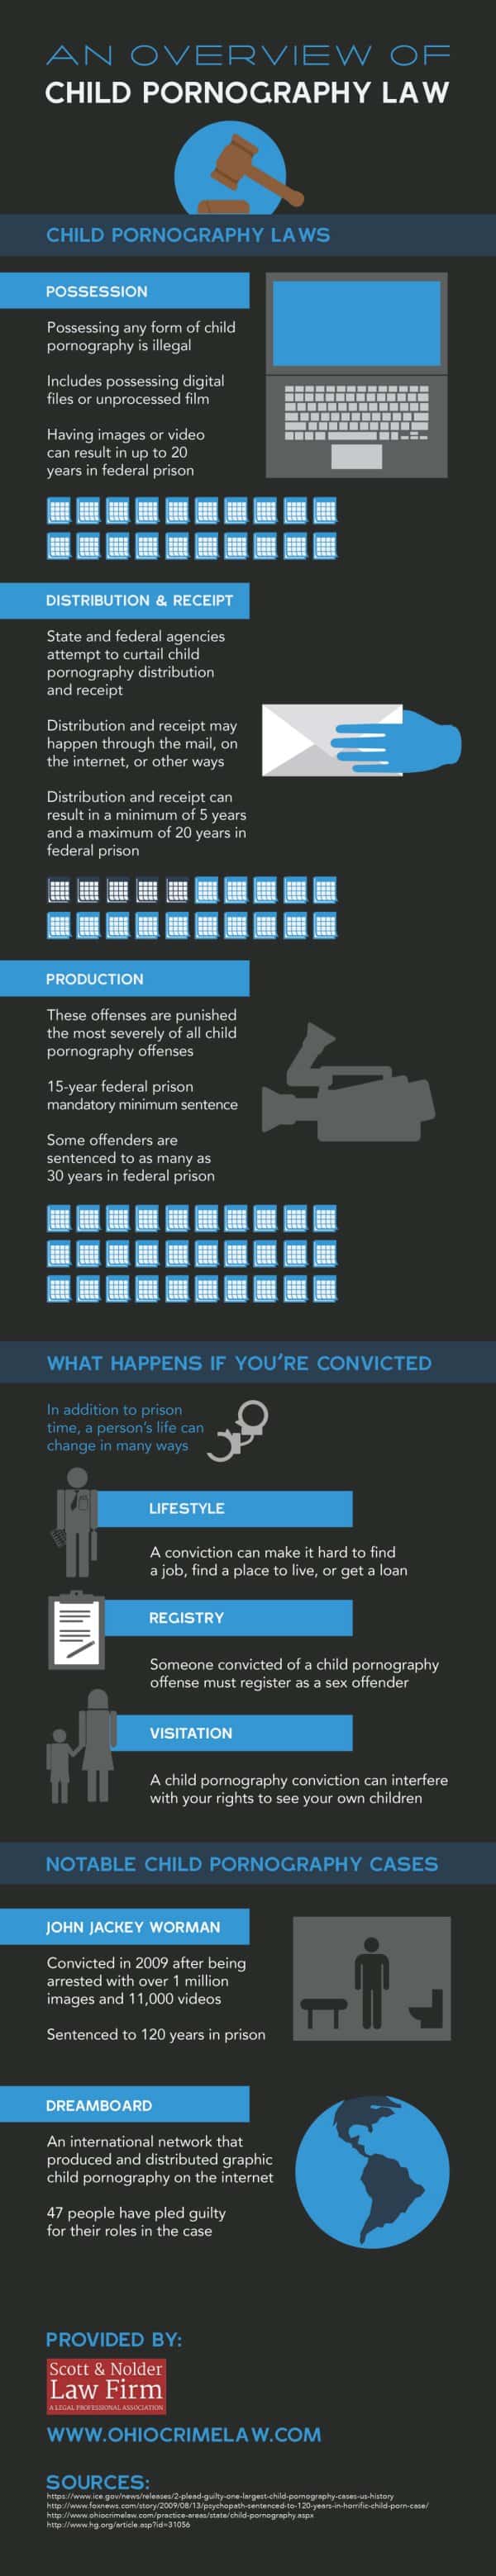 Minor Pornography - An Overview of Child Pornography Law [Infographic]